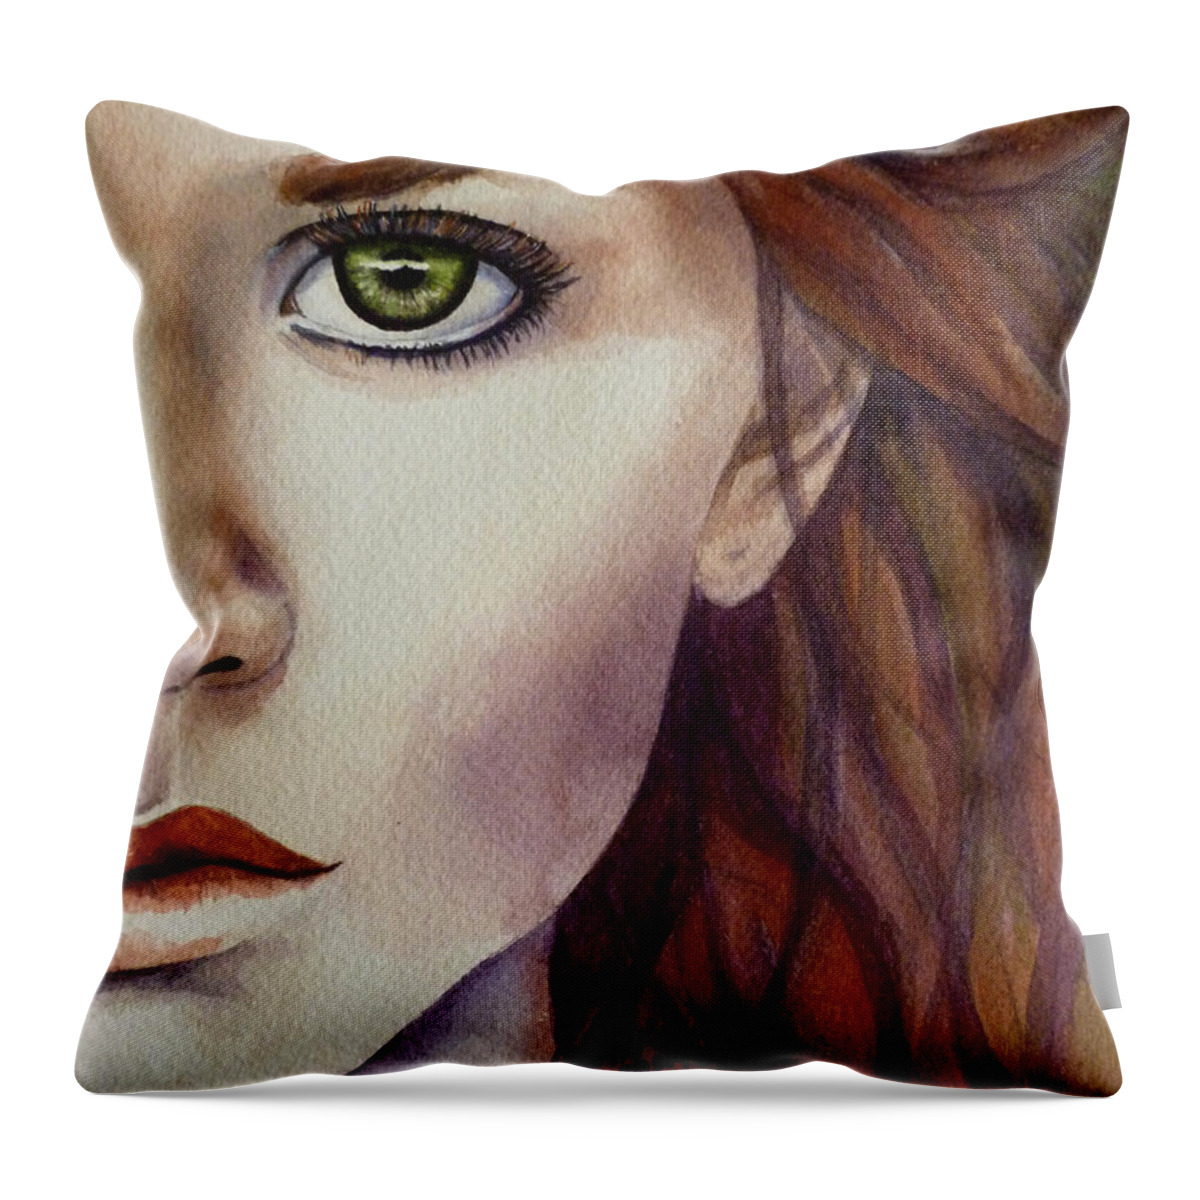 Portrait Of A Redhead. Half A Face Throw Pillow featuring the painting Half a Life by Michal Madison